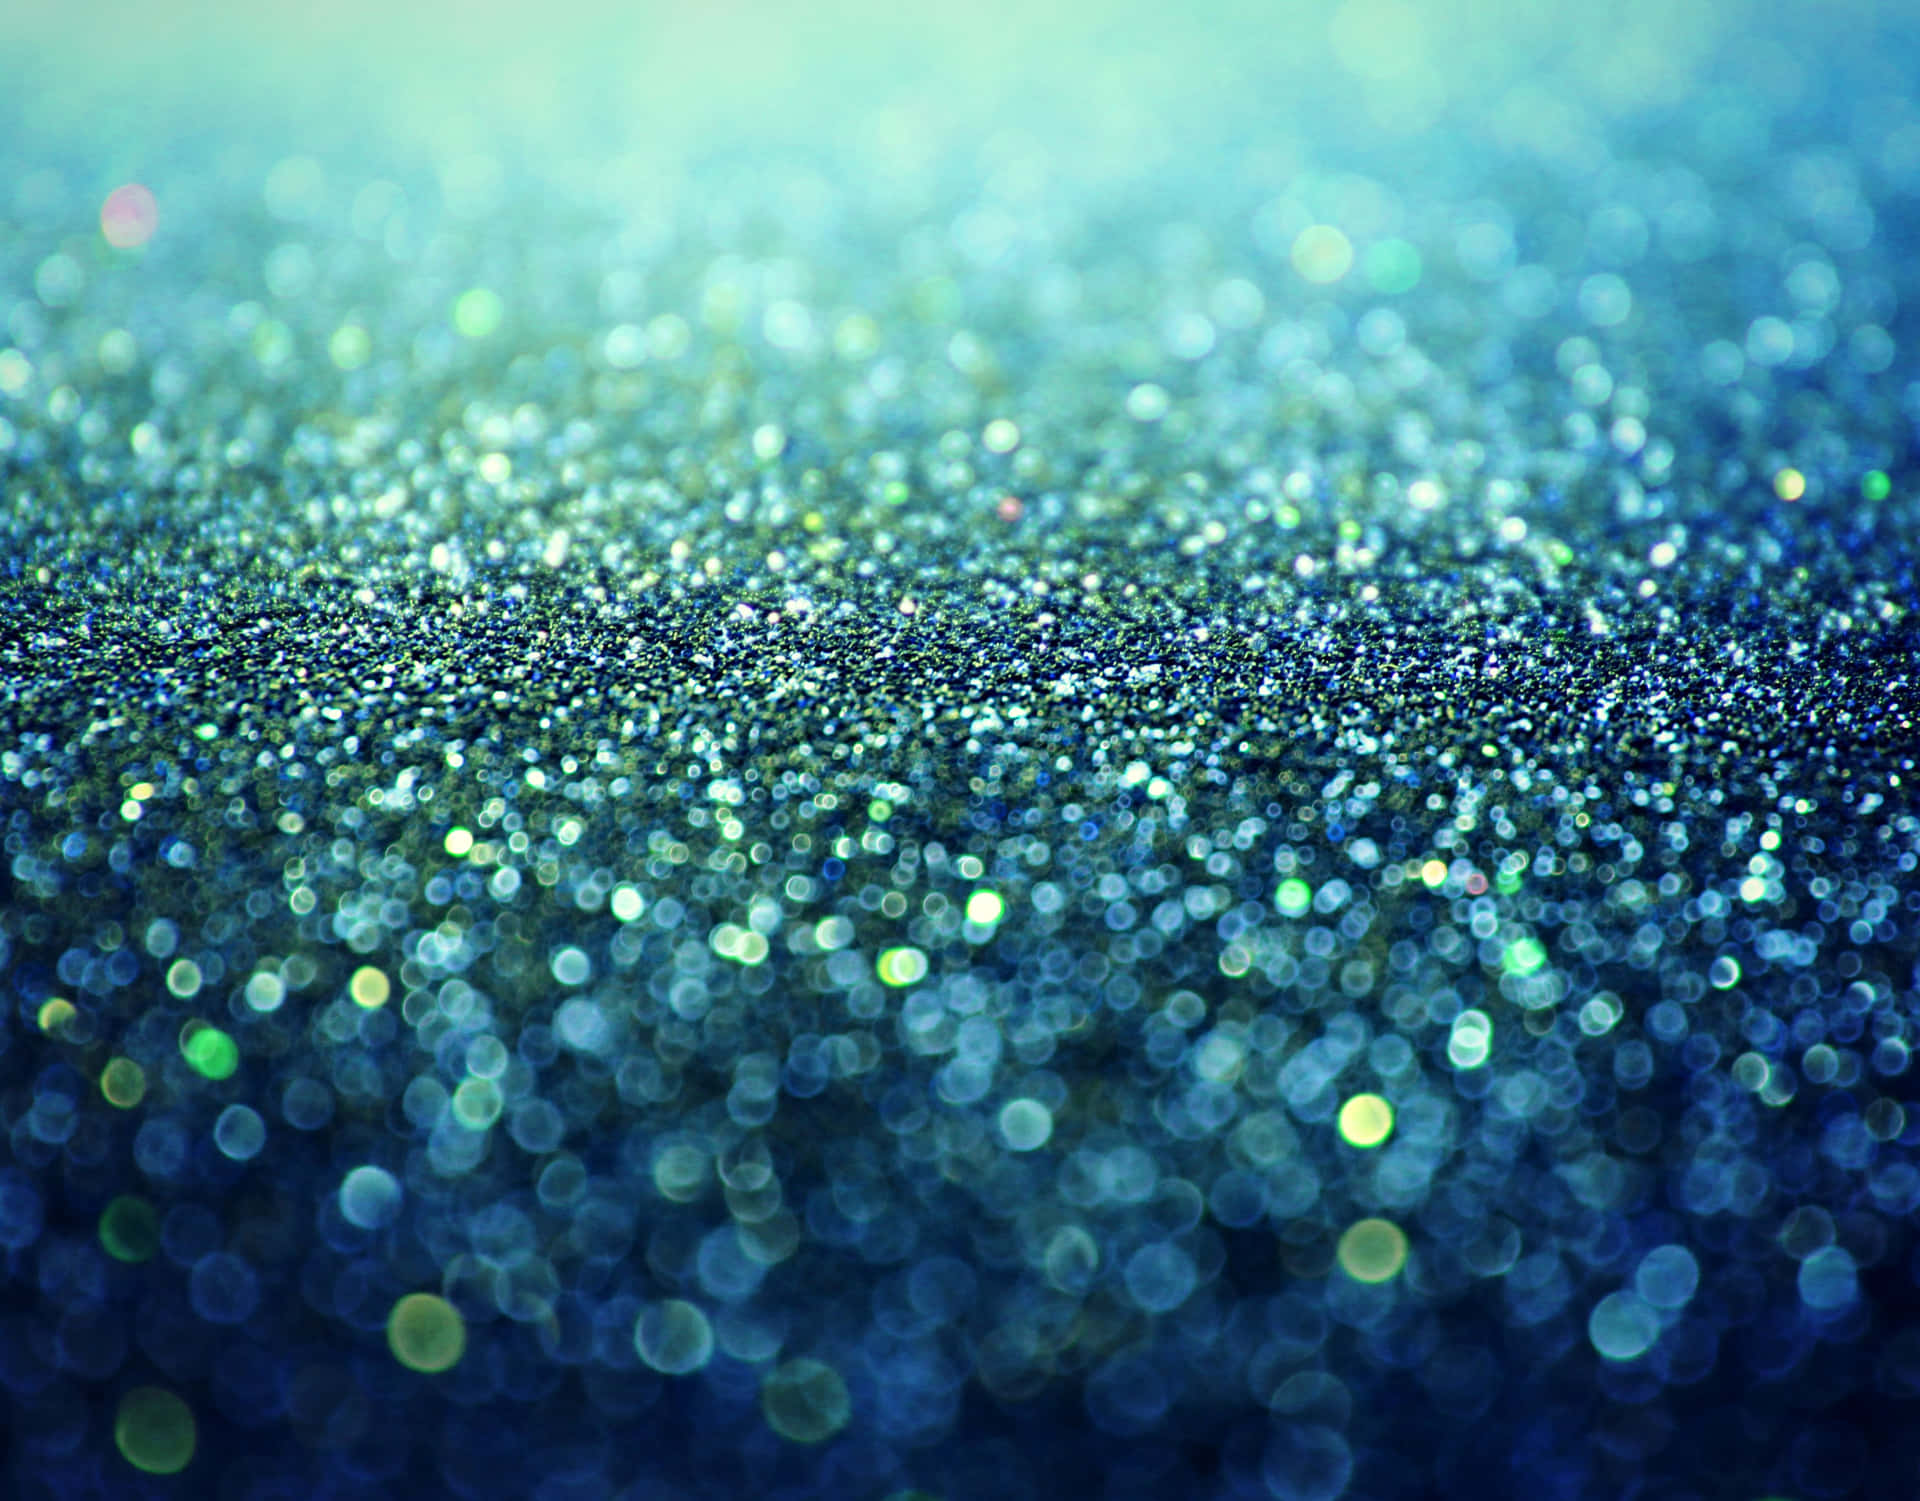 Abstract background of elegant teal glitter